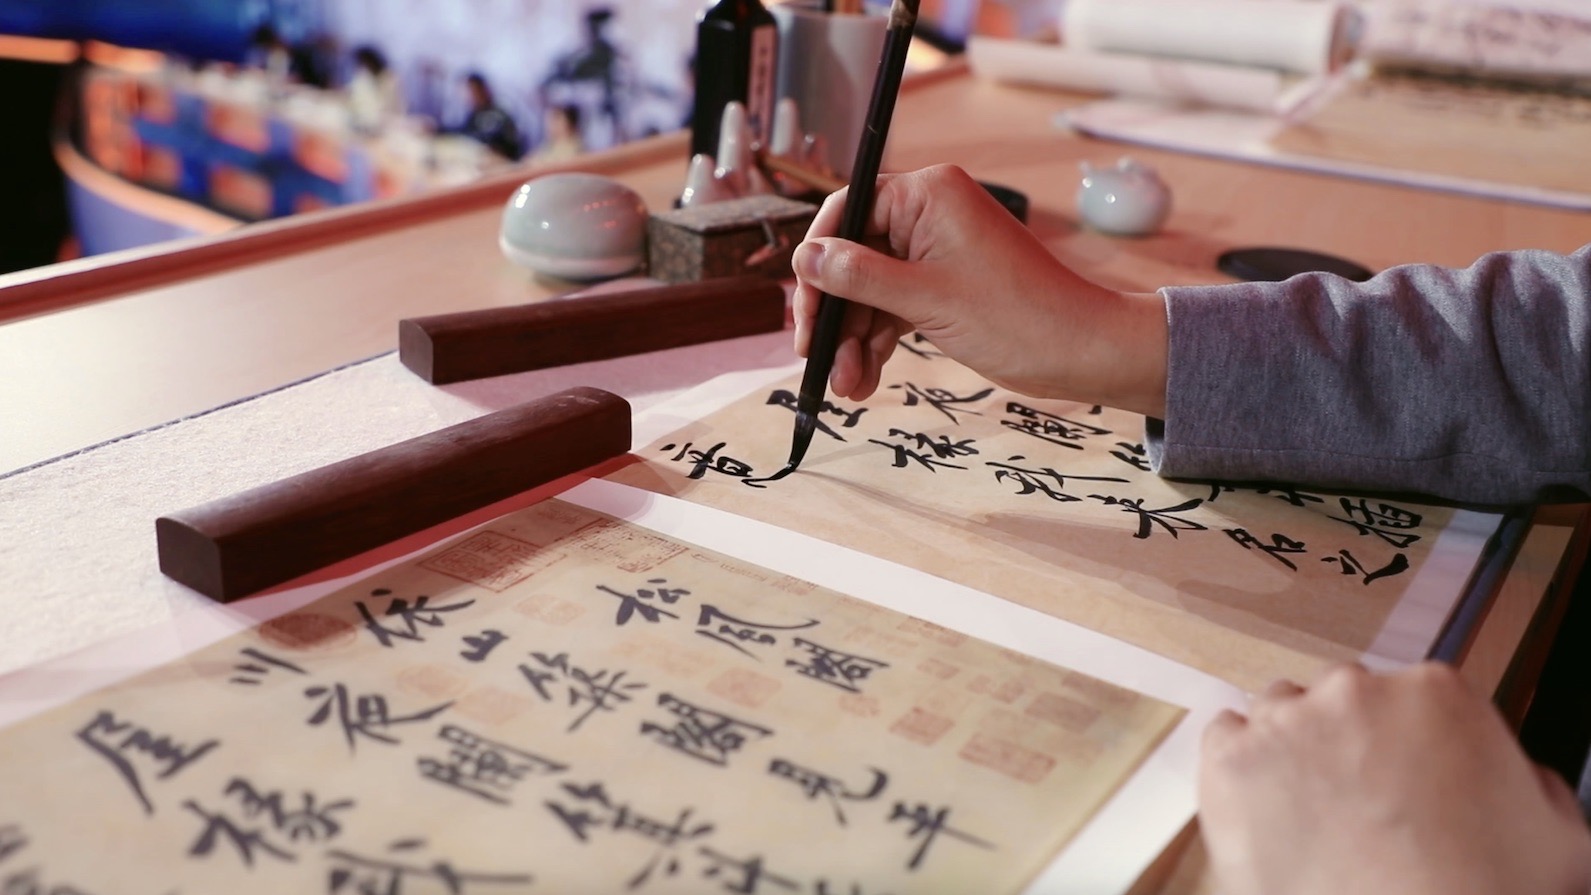 A calligraphy enthusiast practices Huang Tingjian's calligraphy work. /CGTN